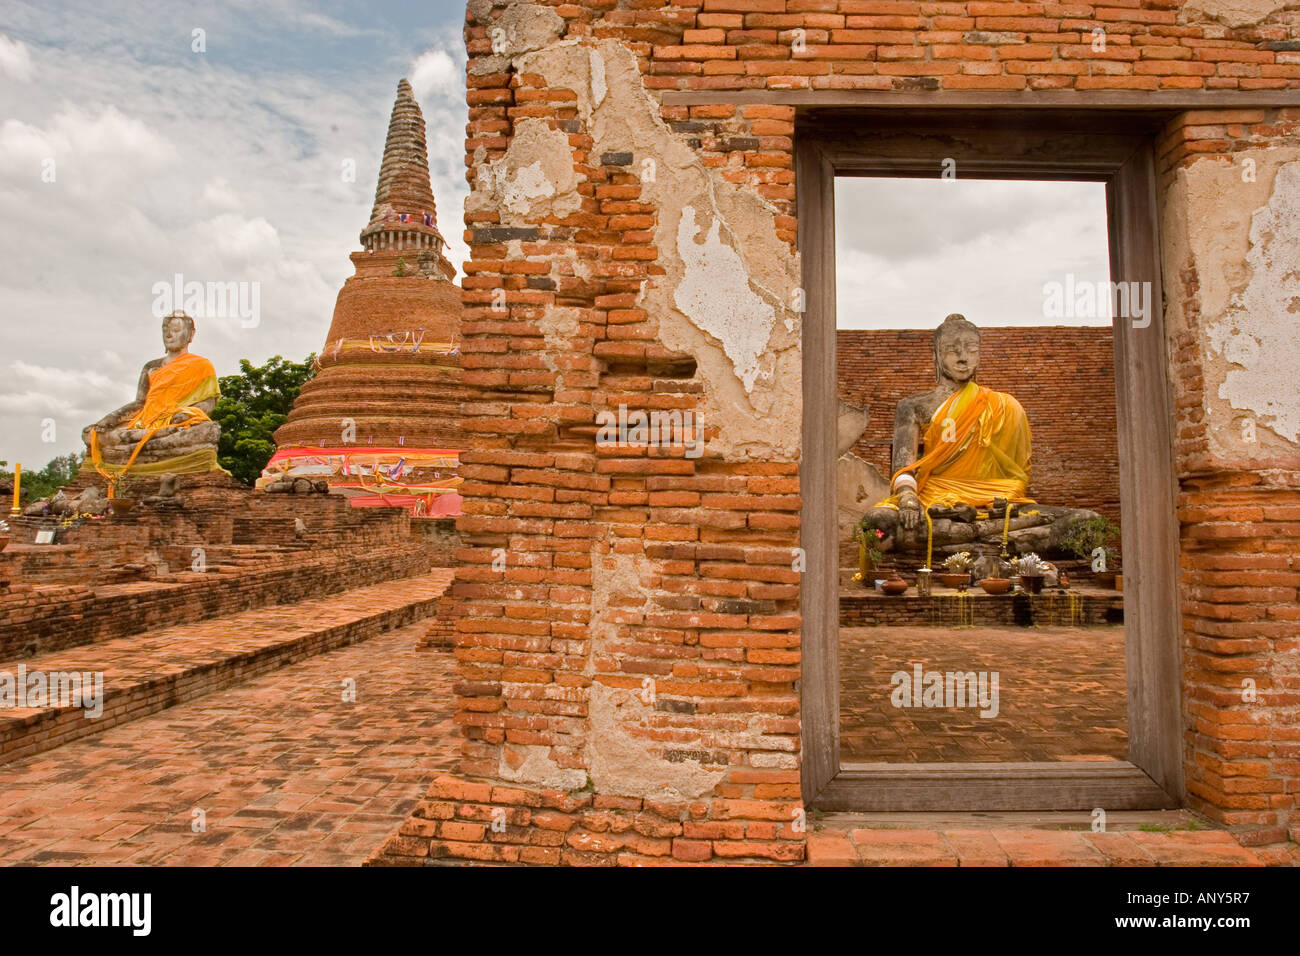 Thailand, Ayutthaya, Two of the many Buddha statues at old historical capital of Siam Stock Photo